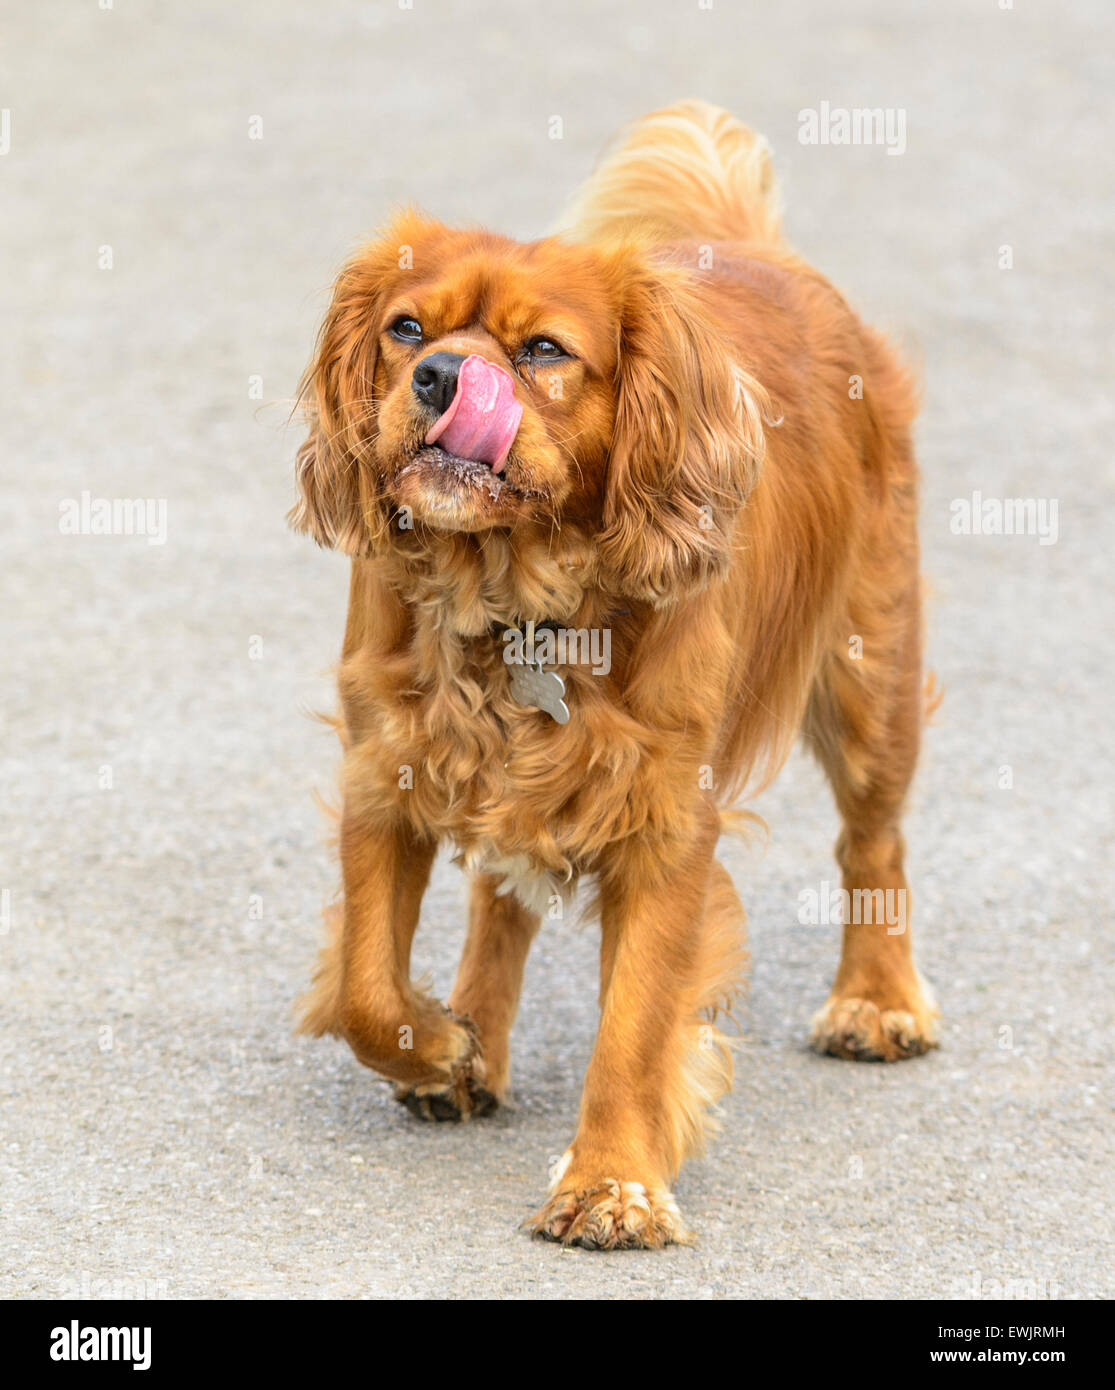 Chestnut coloured Cavalier King Charles Spaniel dog, standing with it's tongue out. Stock Photo